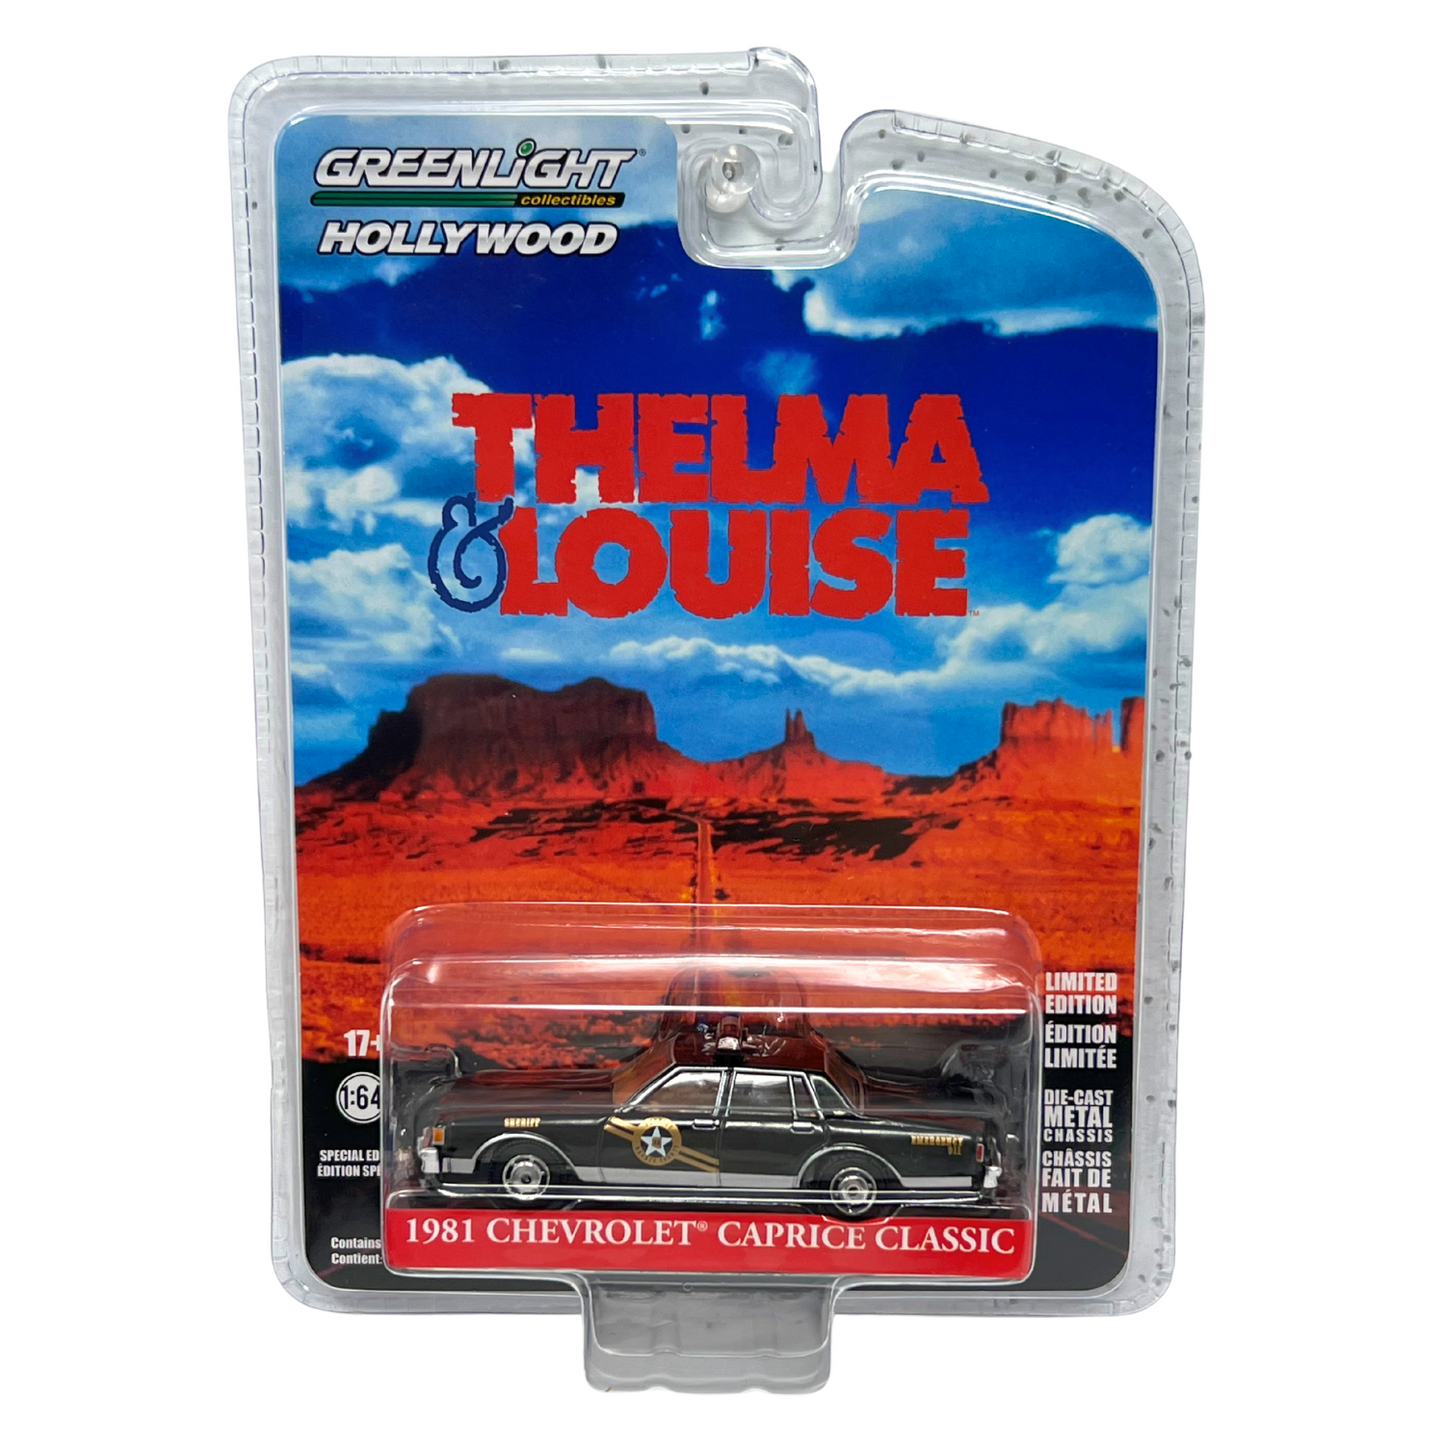 Greenlight Hollywood Thelma & Louise 1981 Chevrolet Caprice Classic 1:64 Diecast